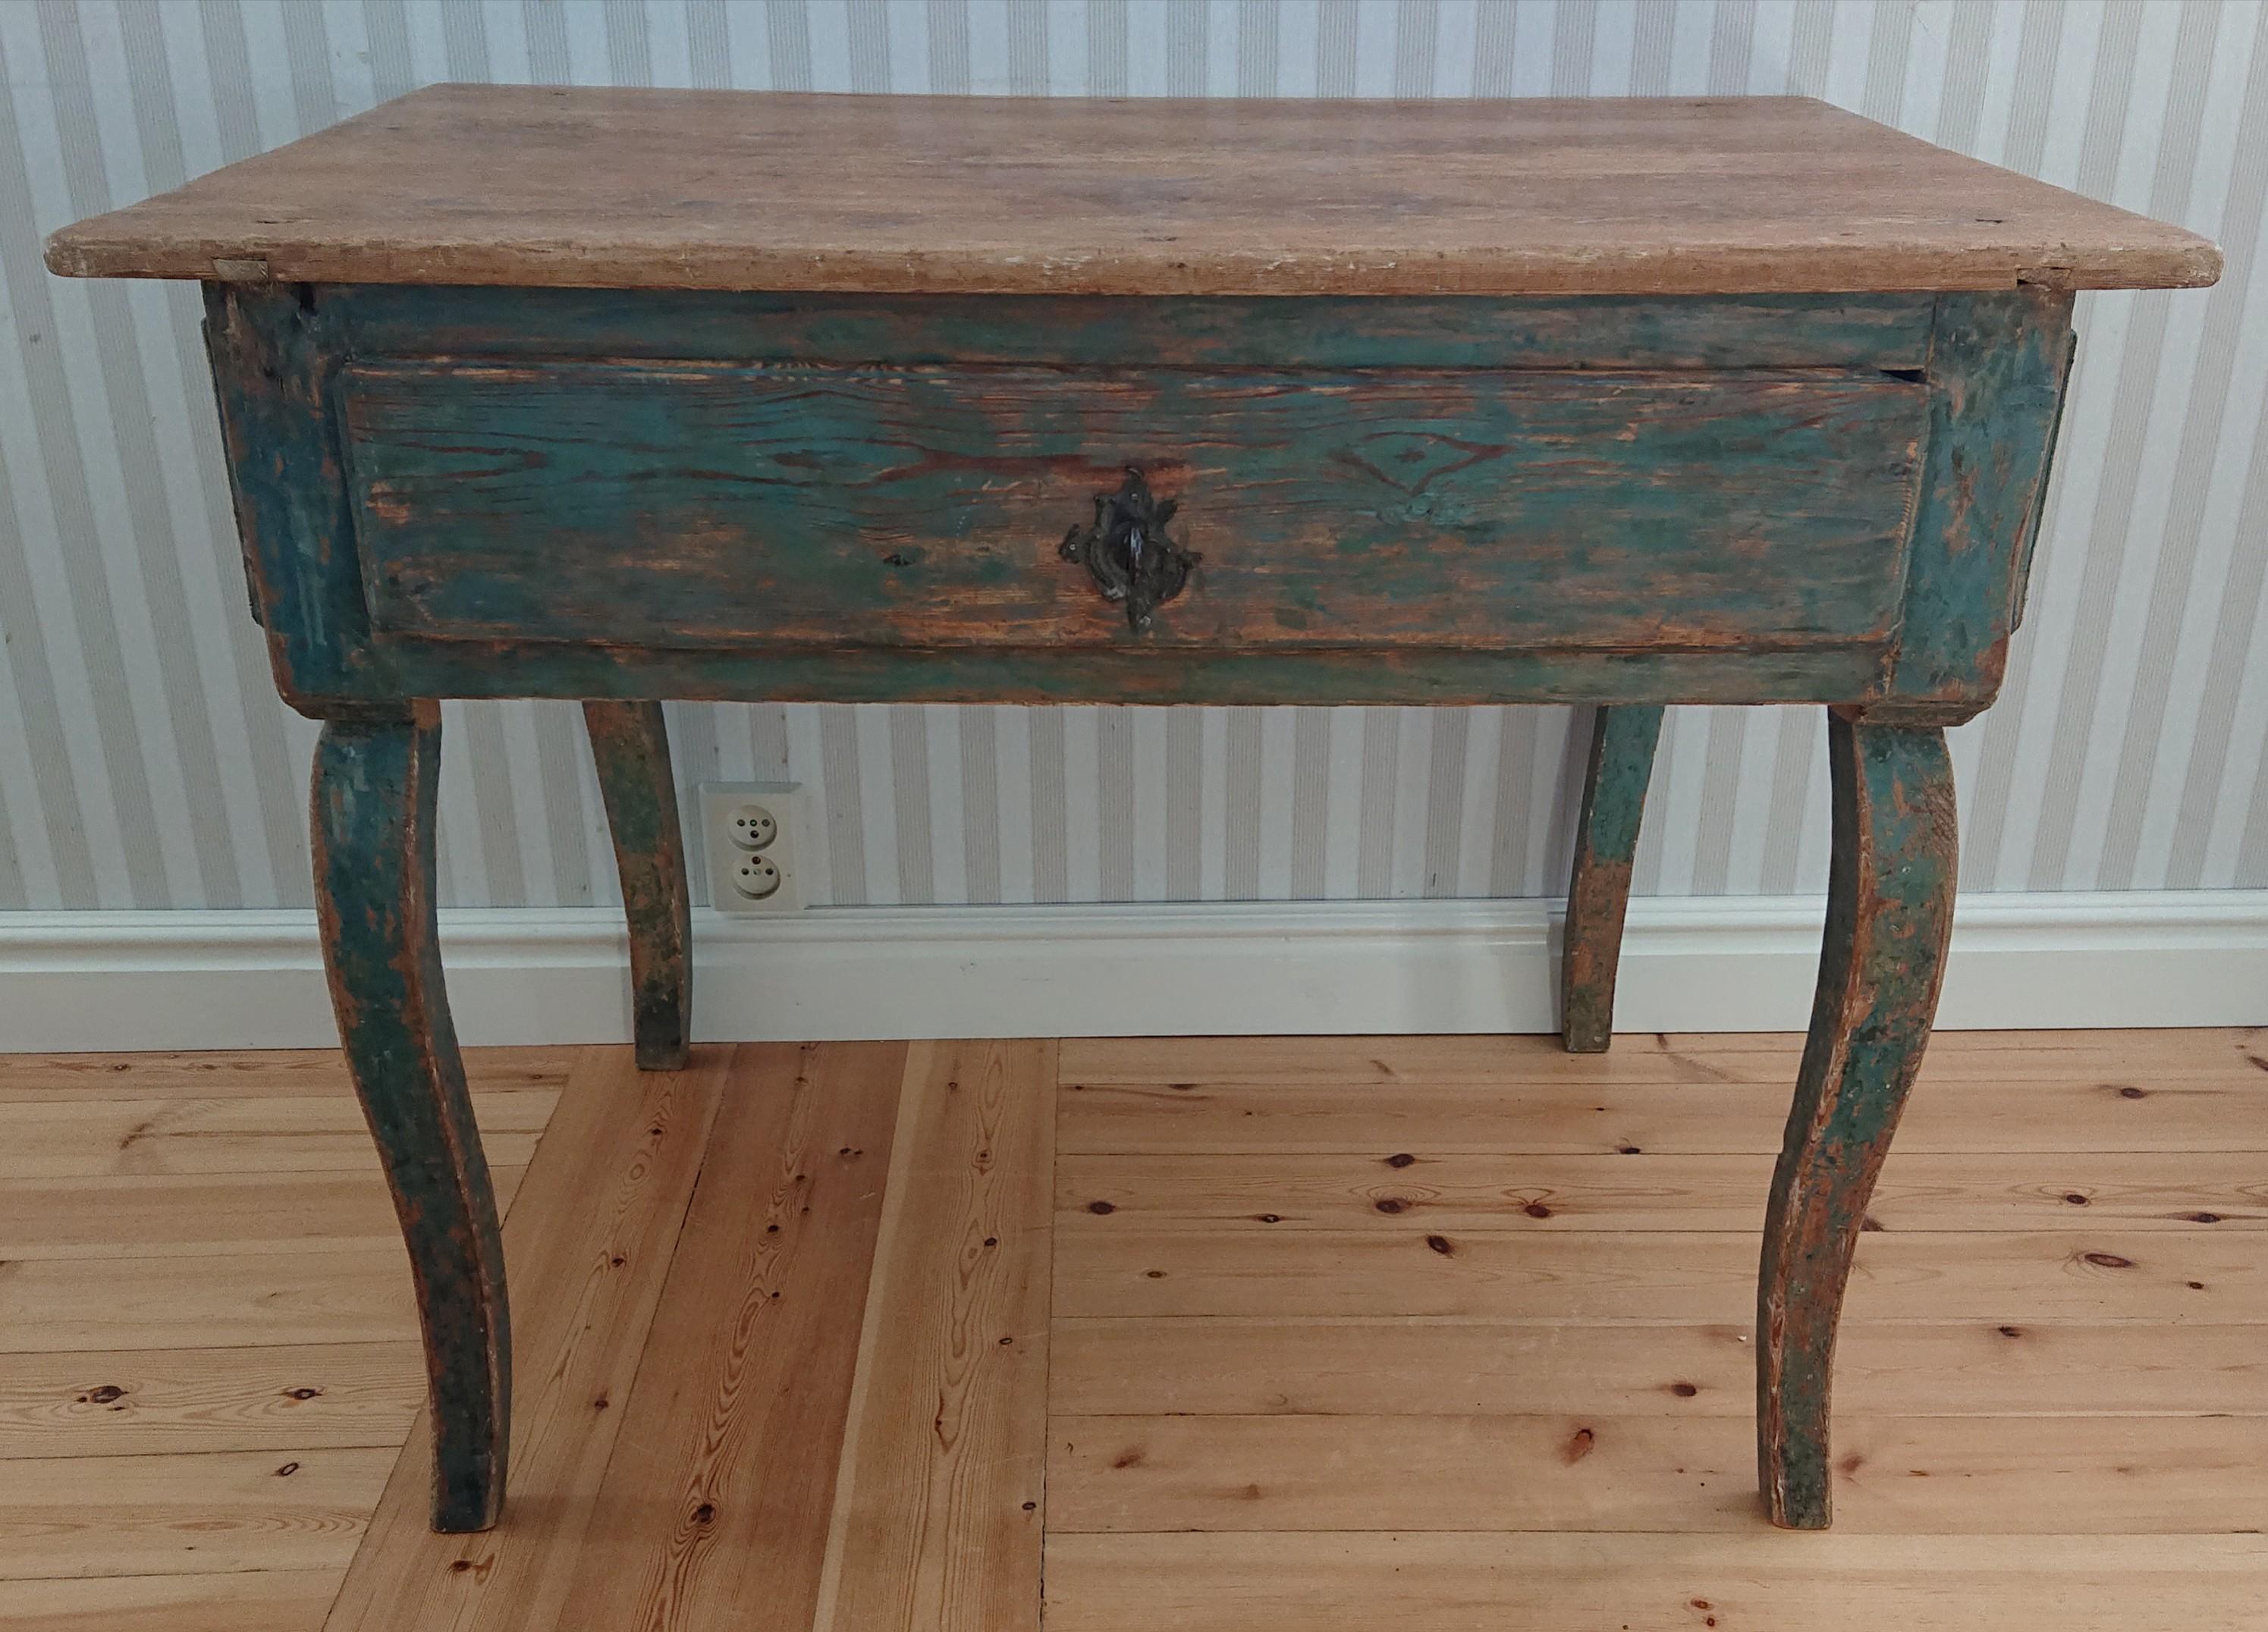 18th century Swedish Antique Rustic provincial rococo table/ desk from Boden Norrbotten, Northern Sweden.
A very rustic rococo desk with incredible patina. 
Handscraped to its originalcolor.
The table has retouches made by a Conservator.
An early